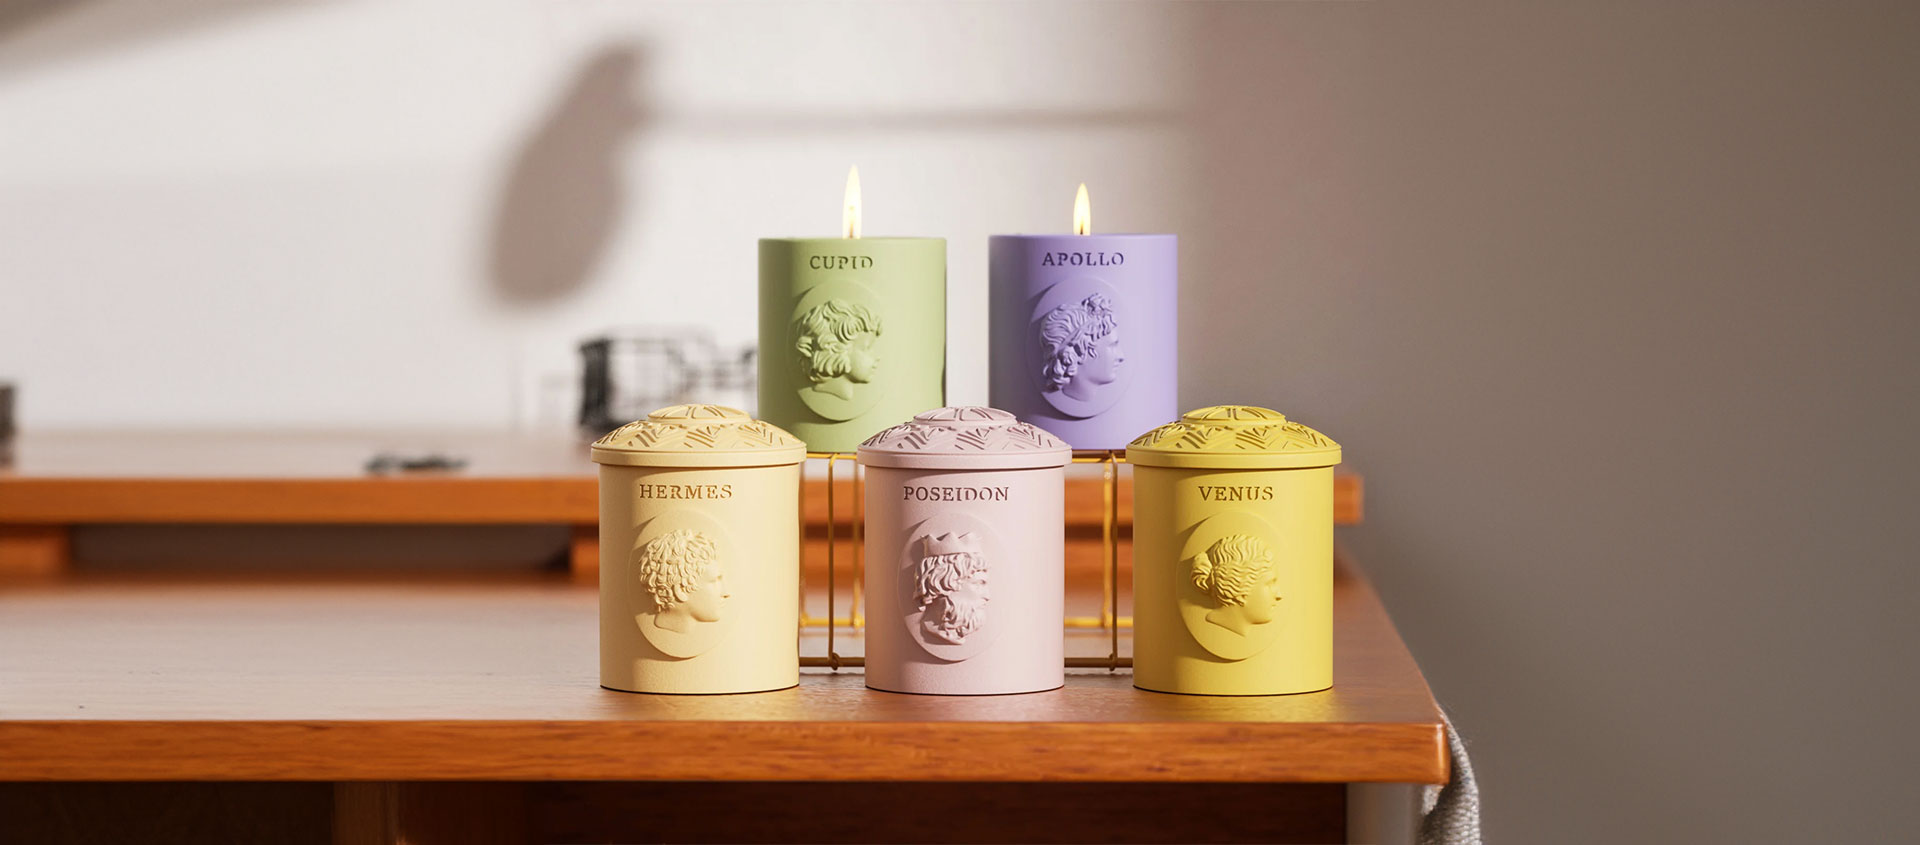 Luxury Artisan Candles - Handcrafted Soy Wax Candles with Unique Scents